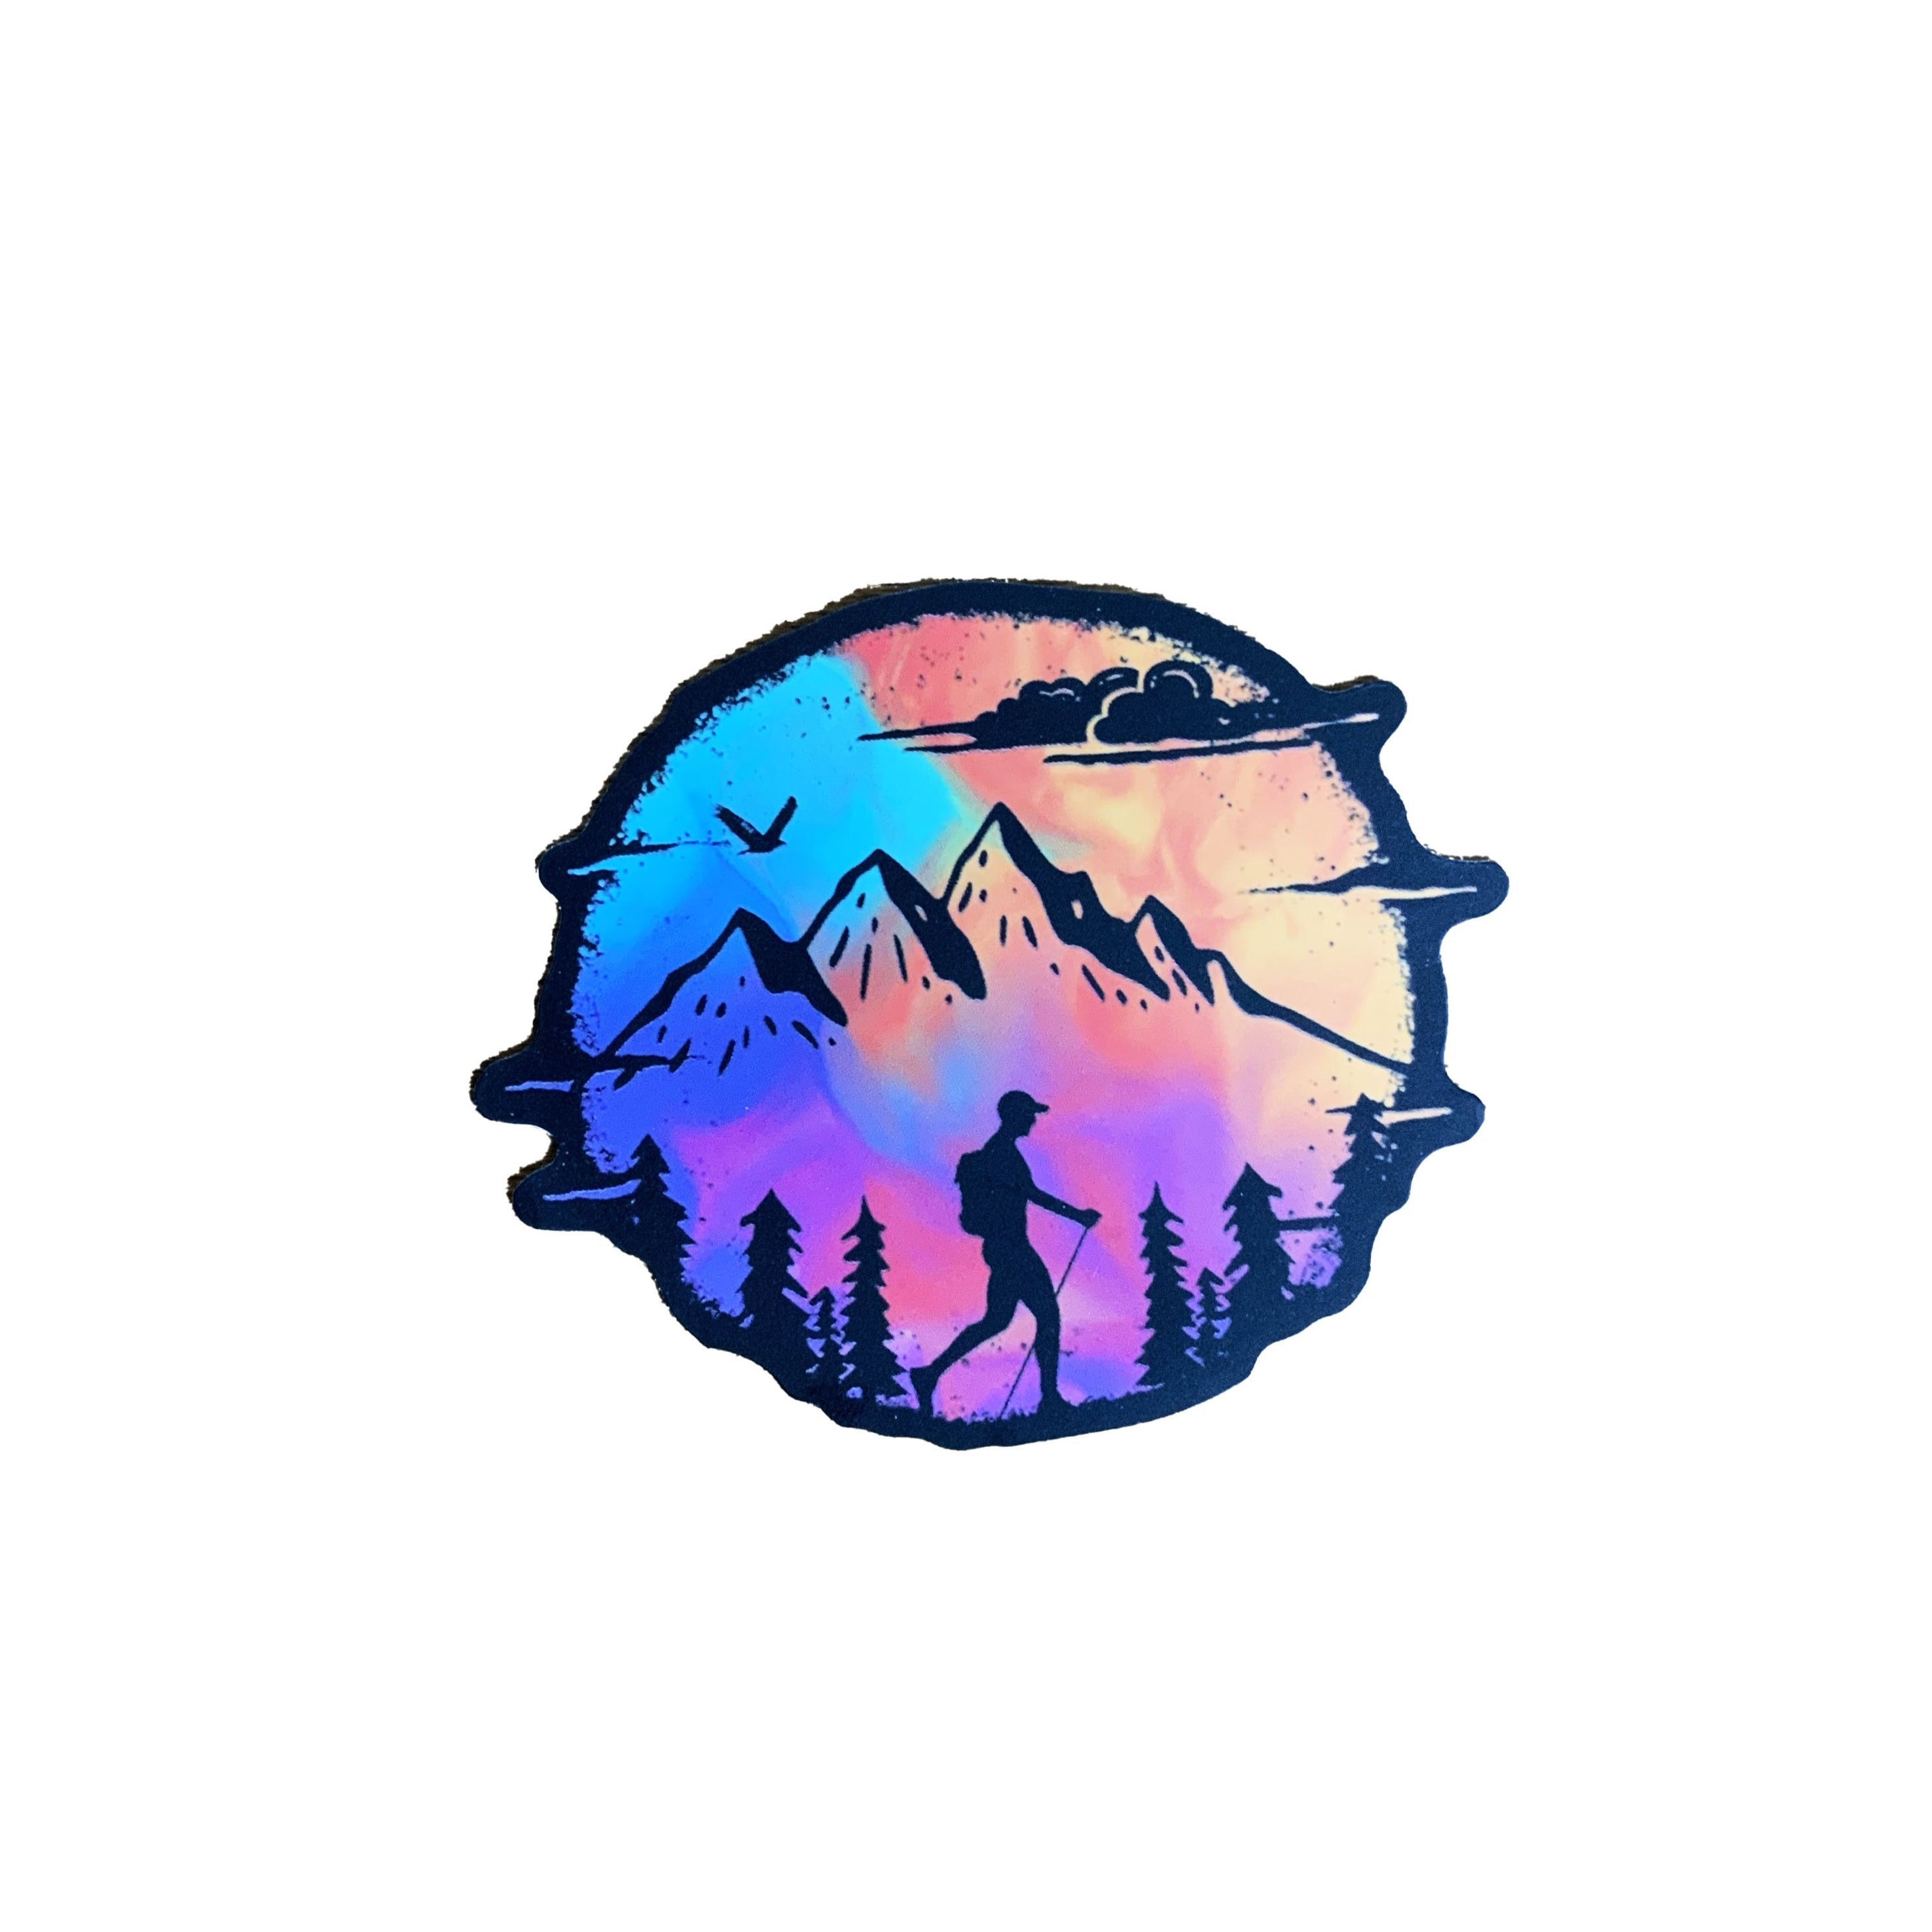 Colorful Hike Sticker, sticker, Pacific Rayne, Defiance Outdoor Gear Co.